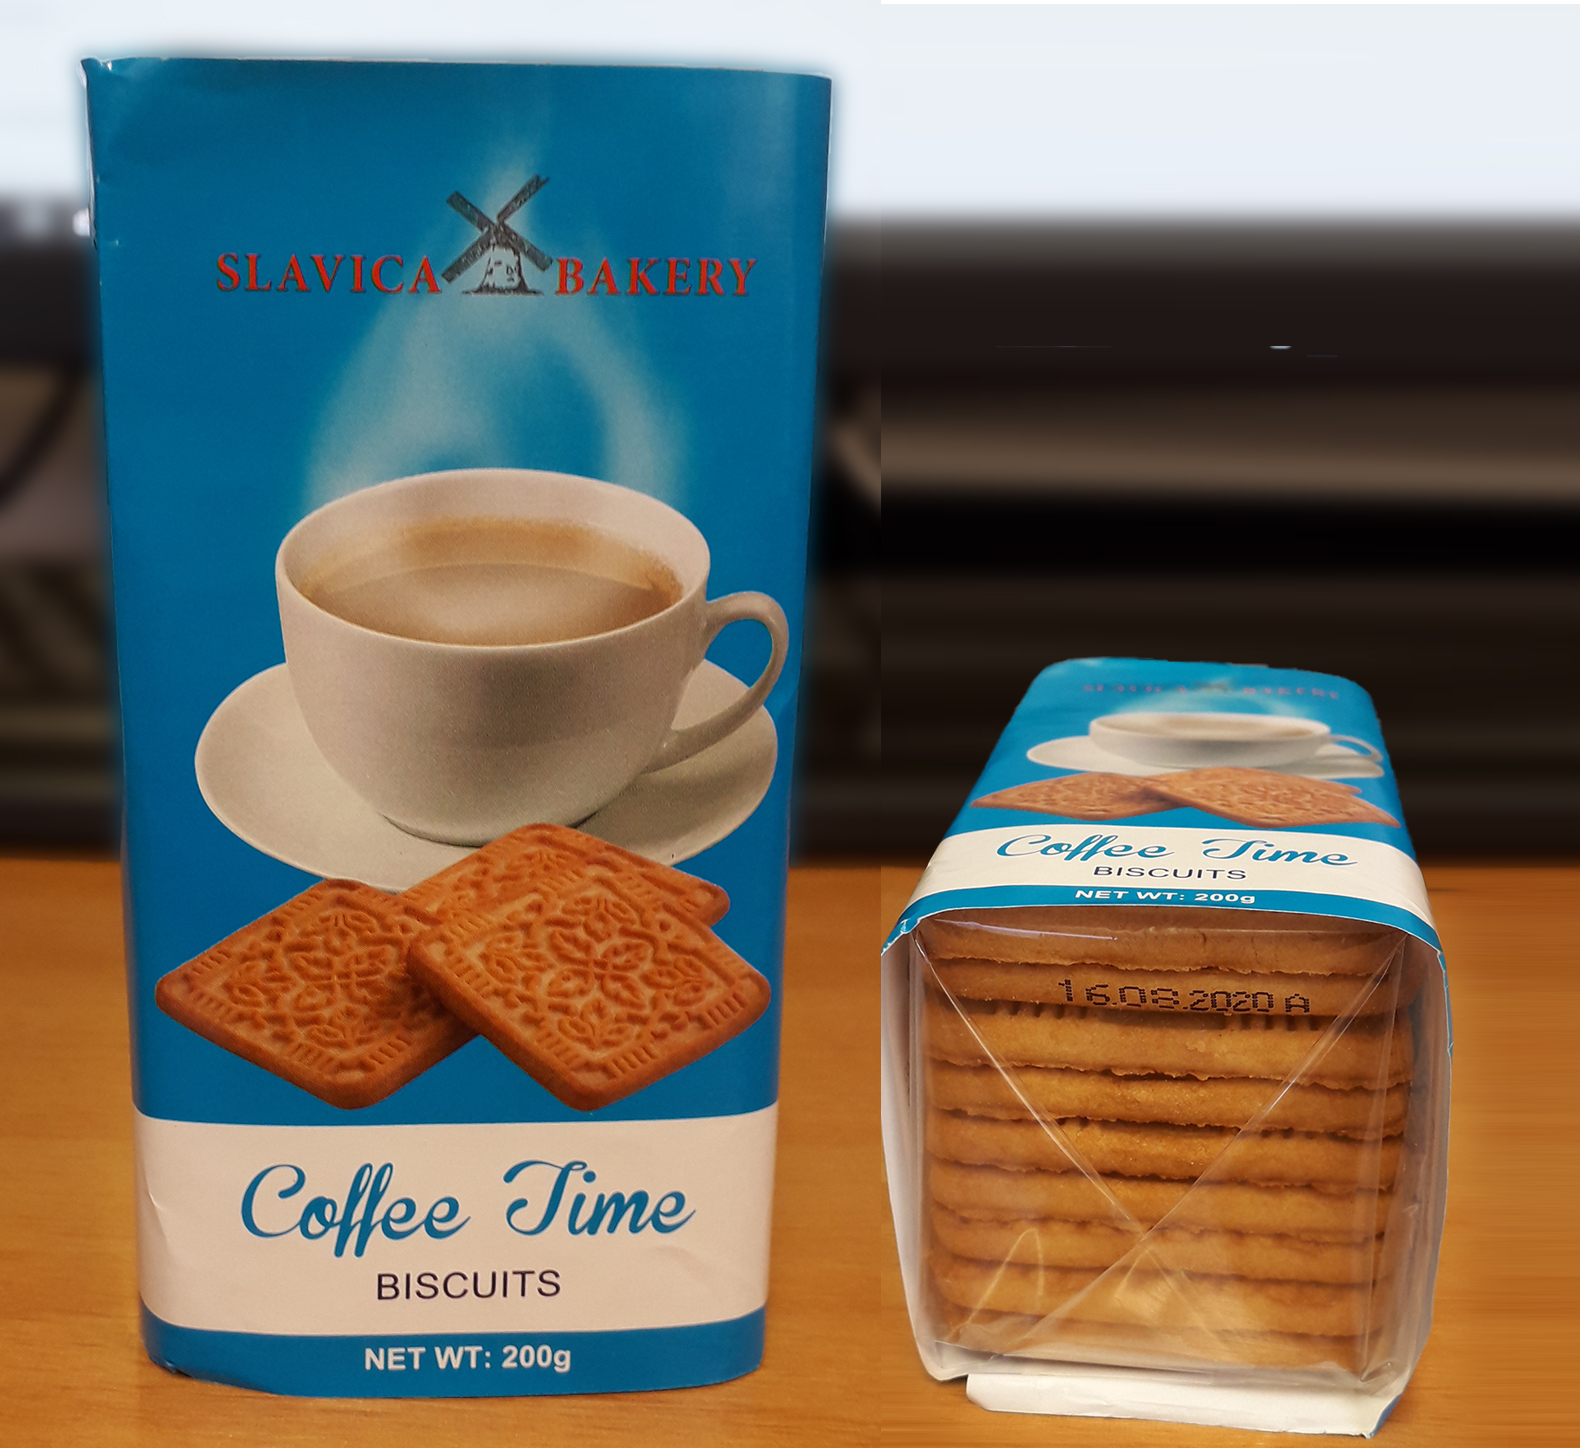 Slavica Bakery brand Coffee Time Biscuits in clear, plastic pack